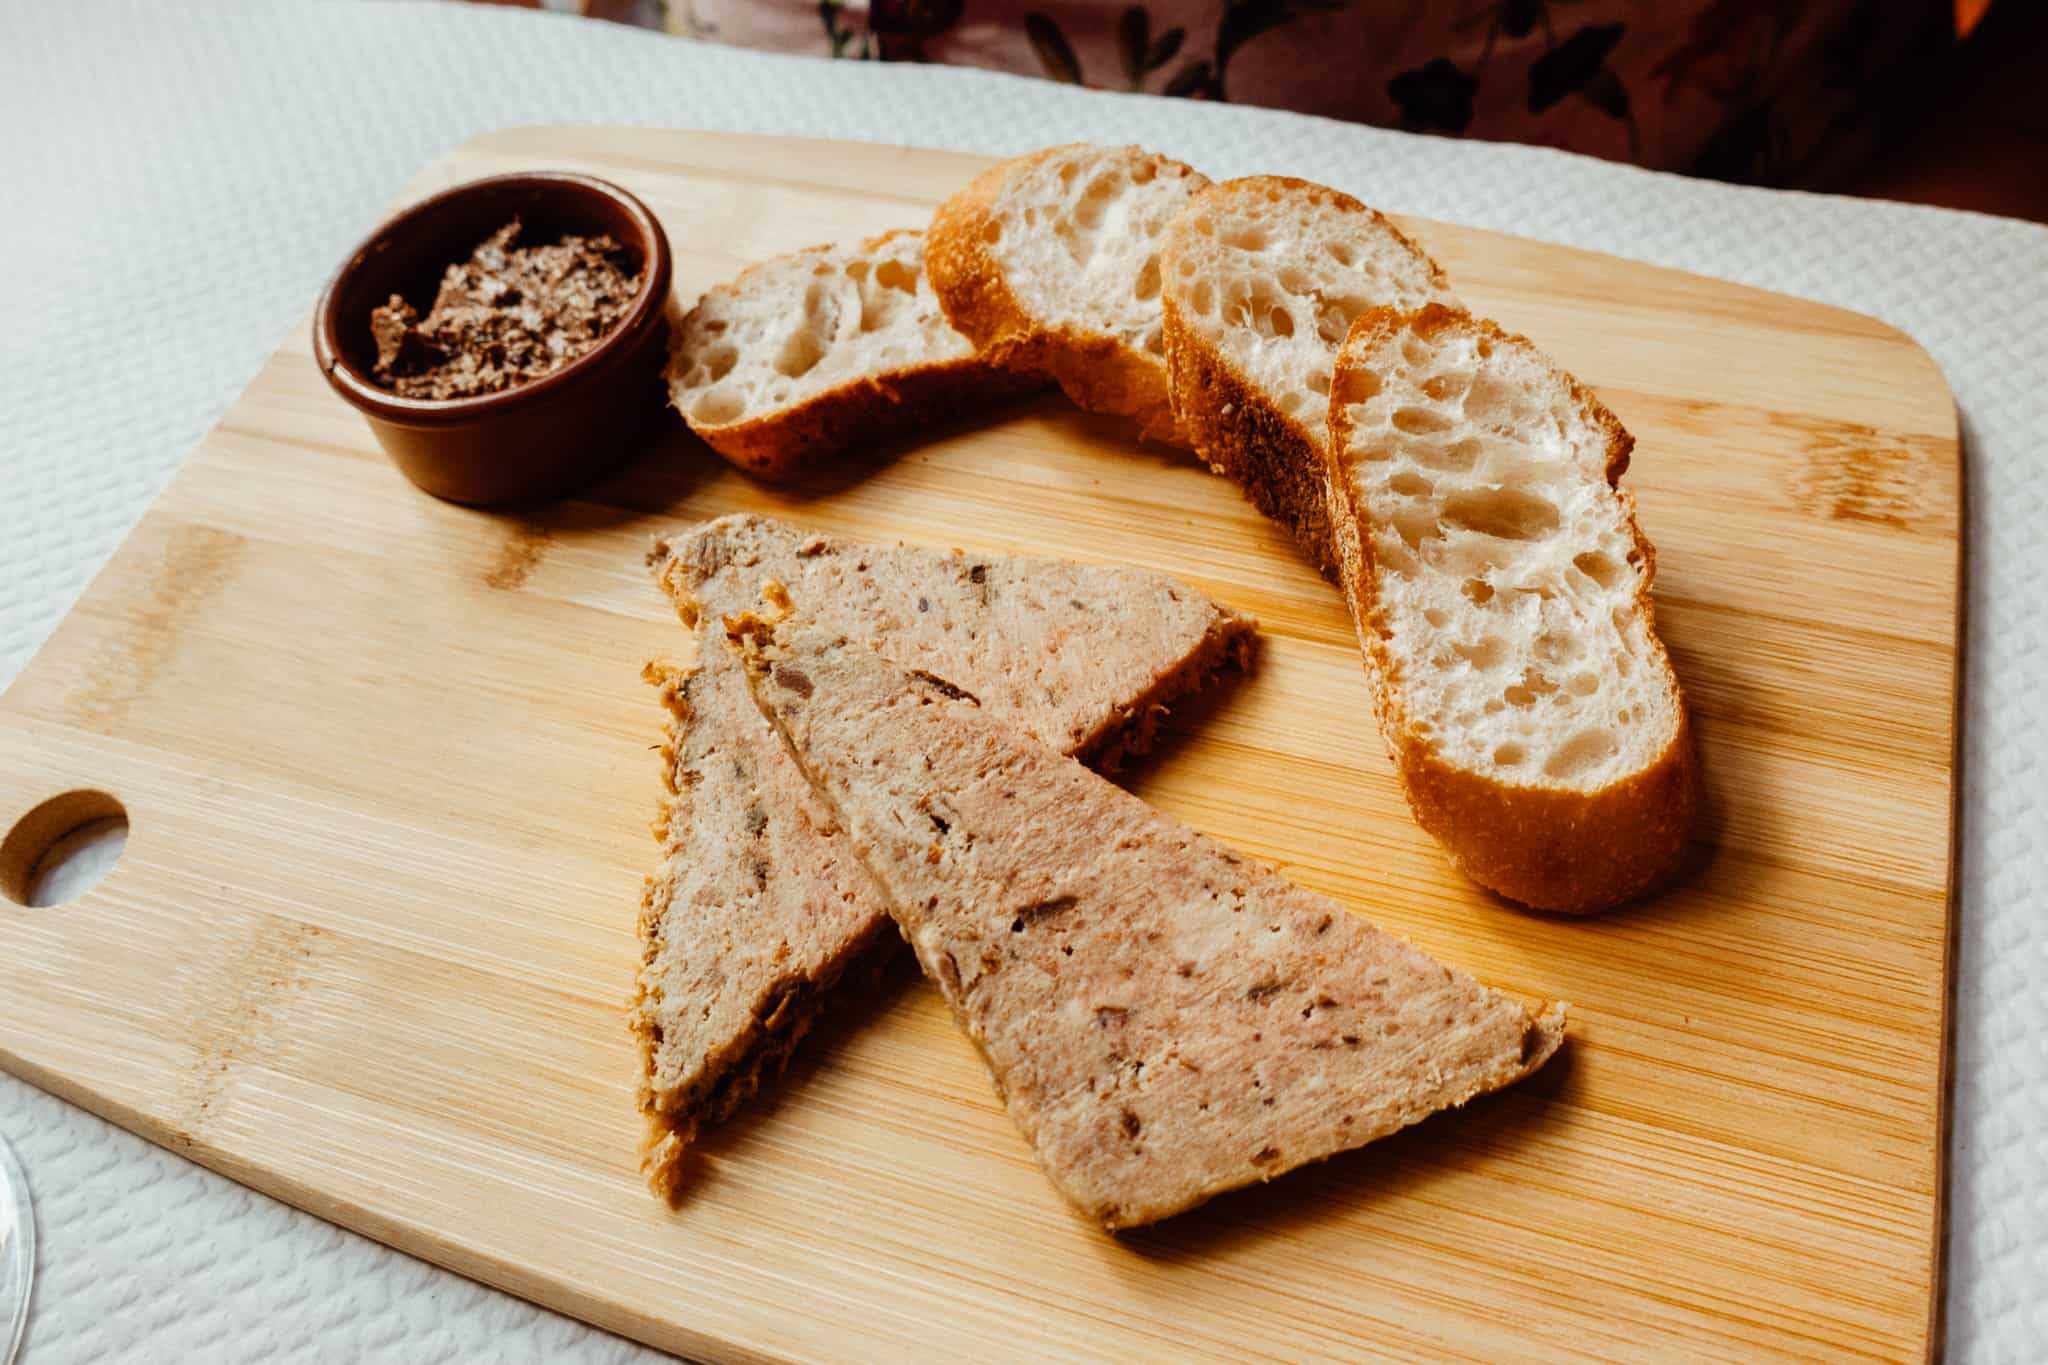 Pate at Le Bistrot in Aix-en-Provencce